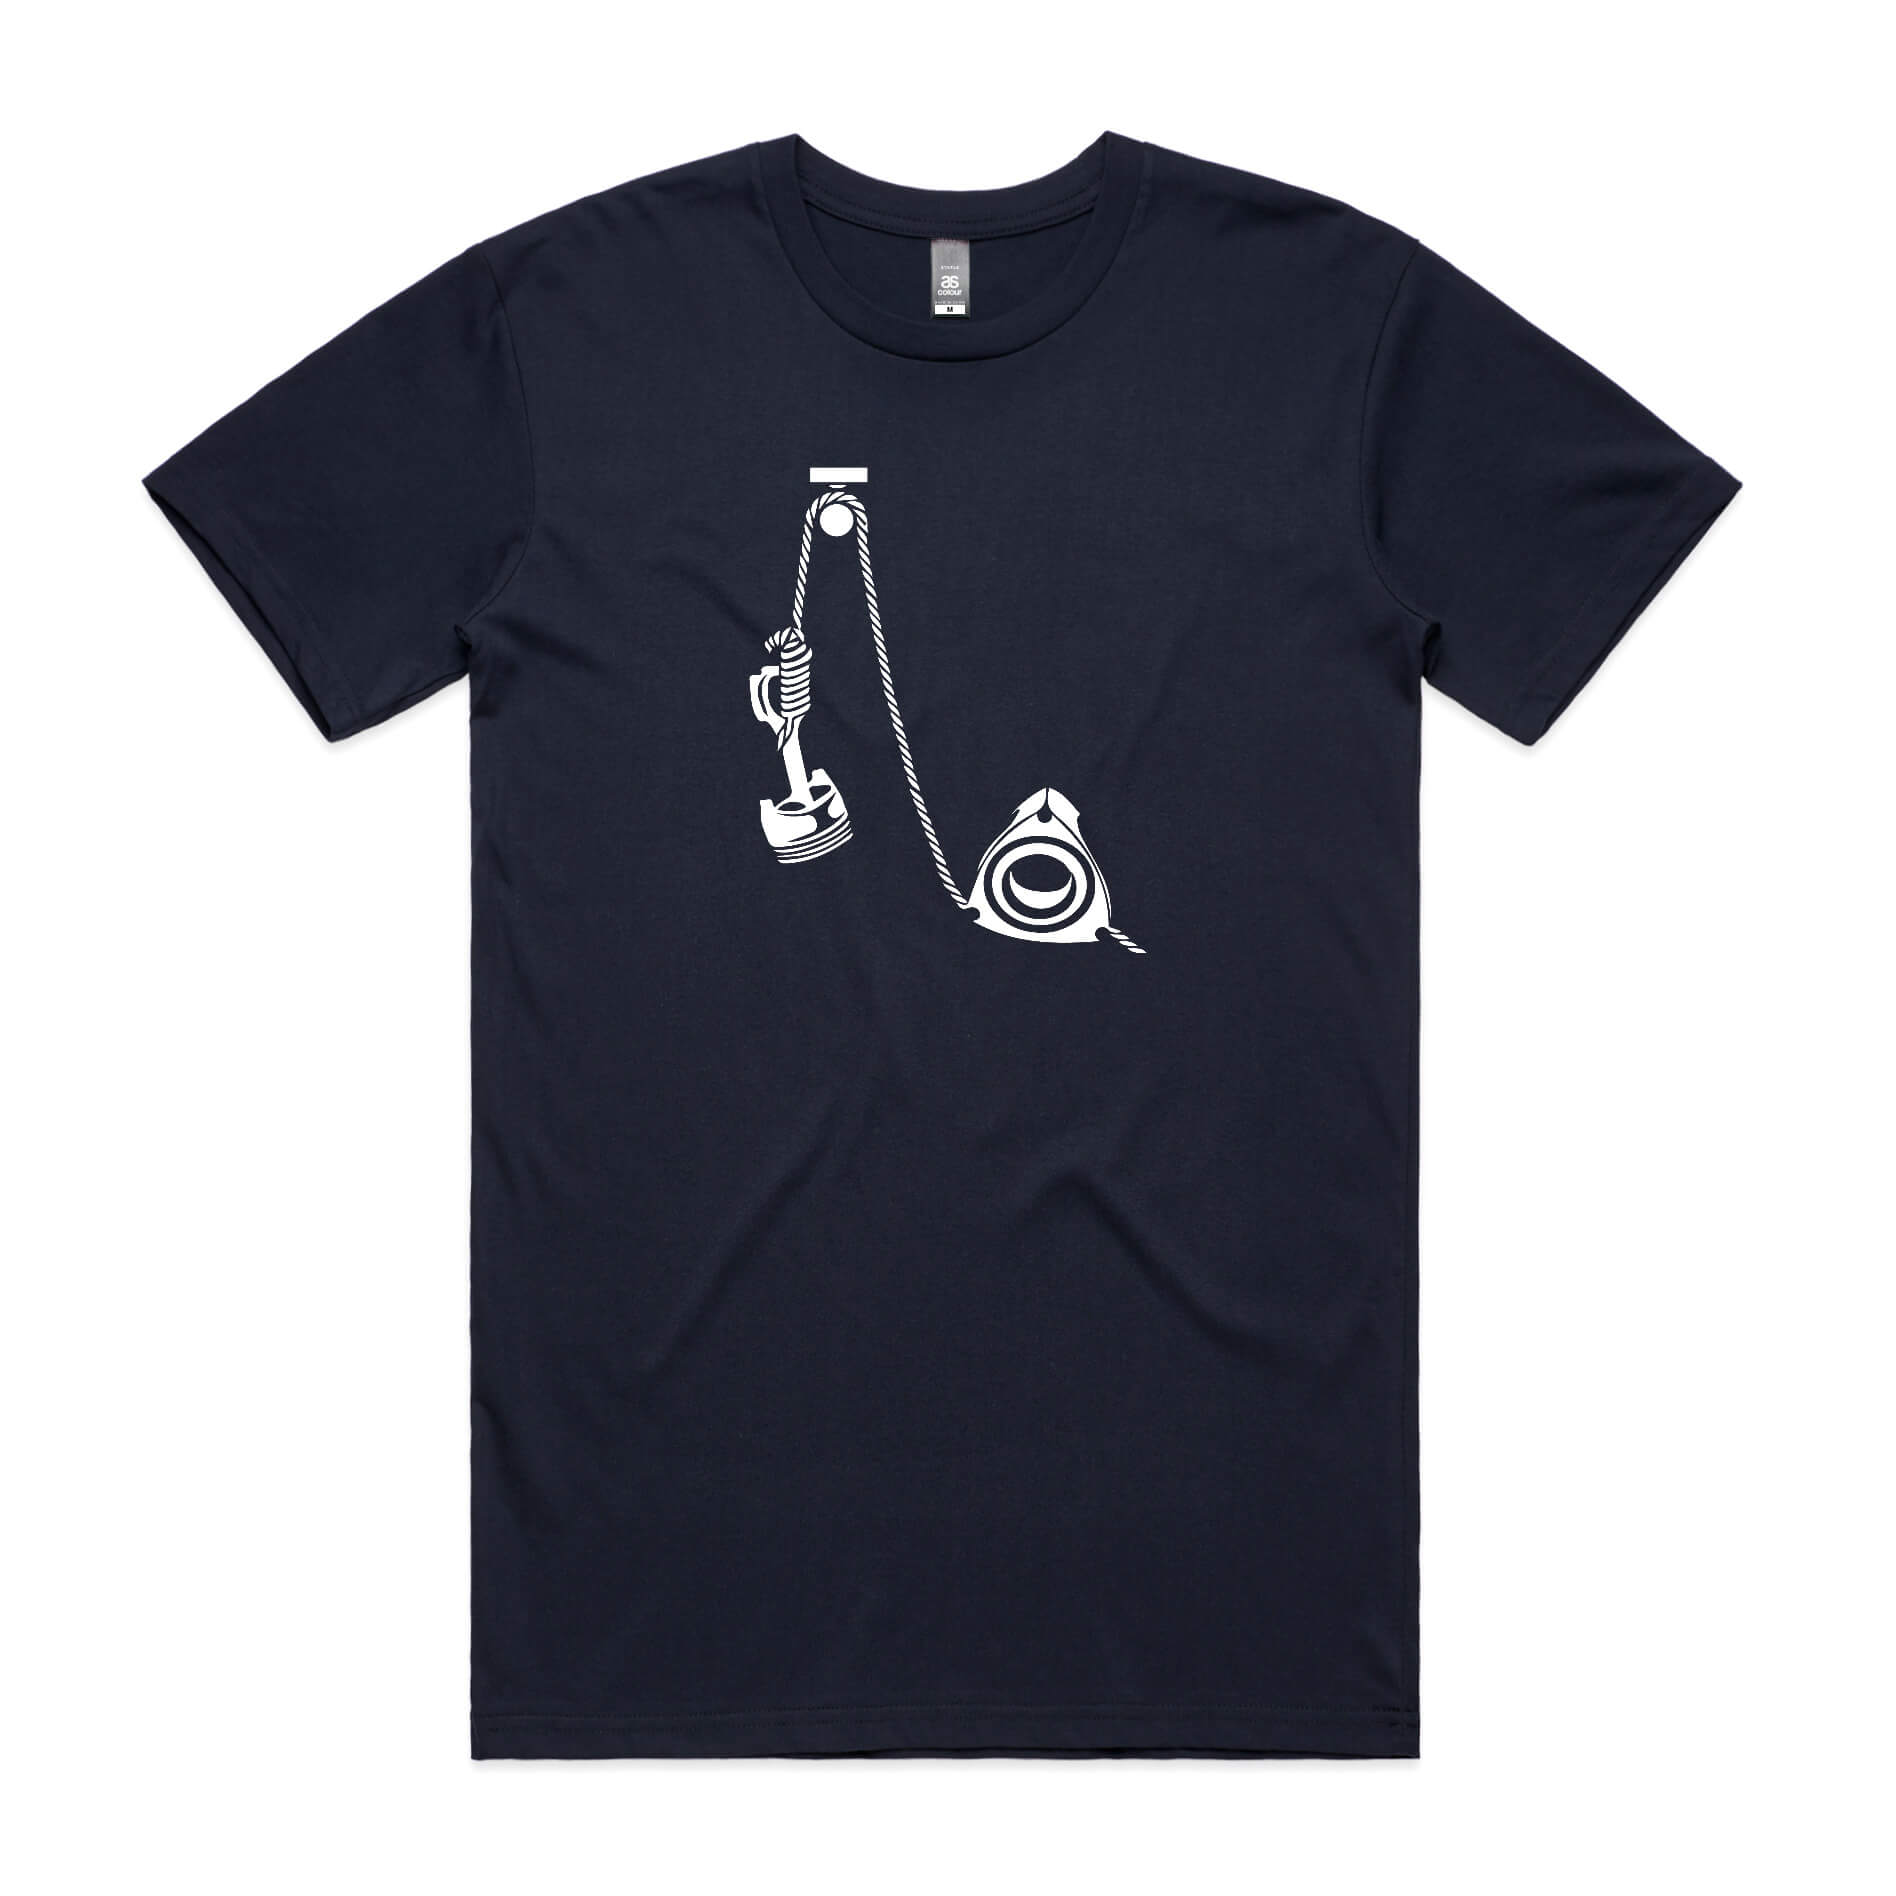 Rotary hangs piston t-shirt in navy blue featuring a white cartoon of a rotary holding a piston in a noose